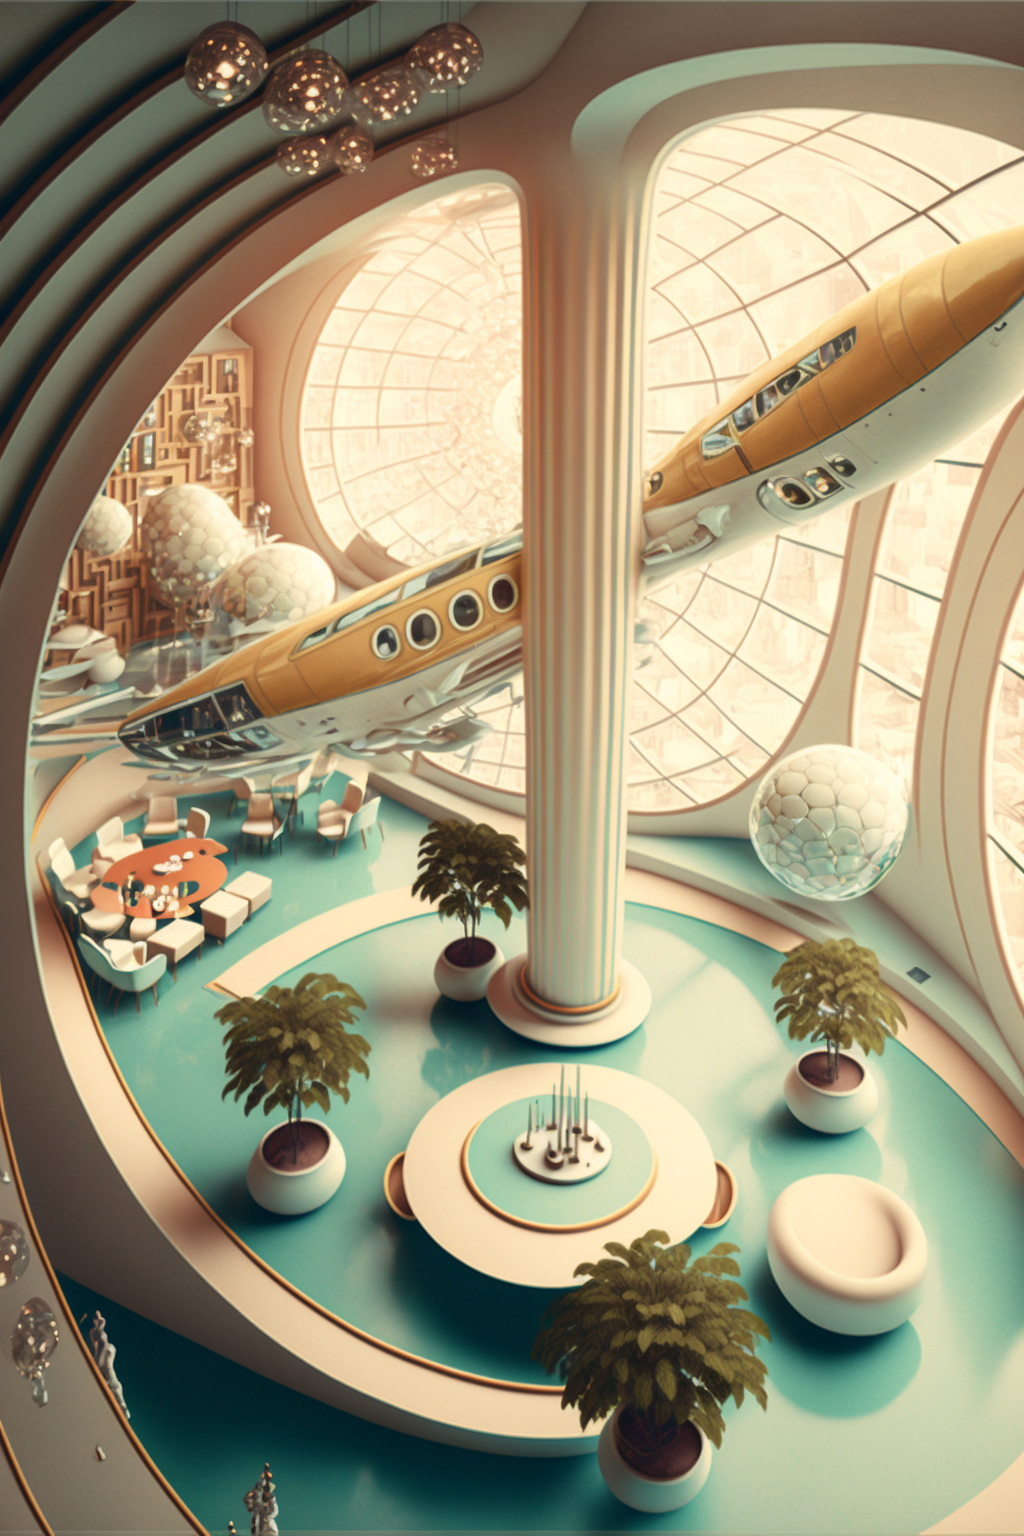 Luxury in the style of Space-Age Plutocratic Futurism 1